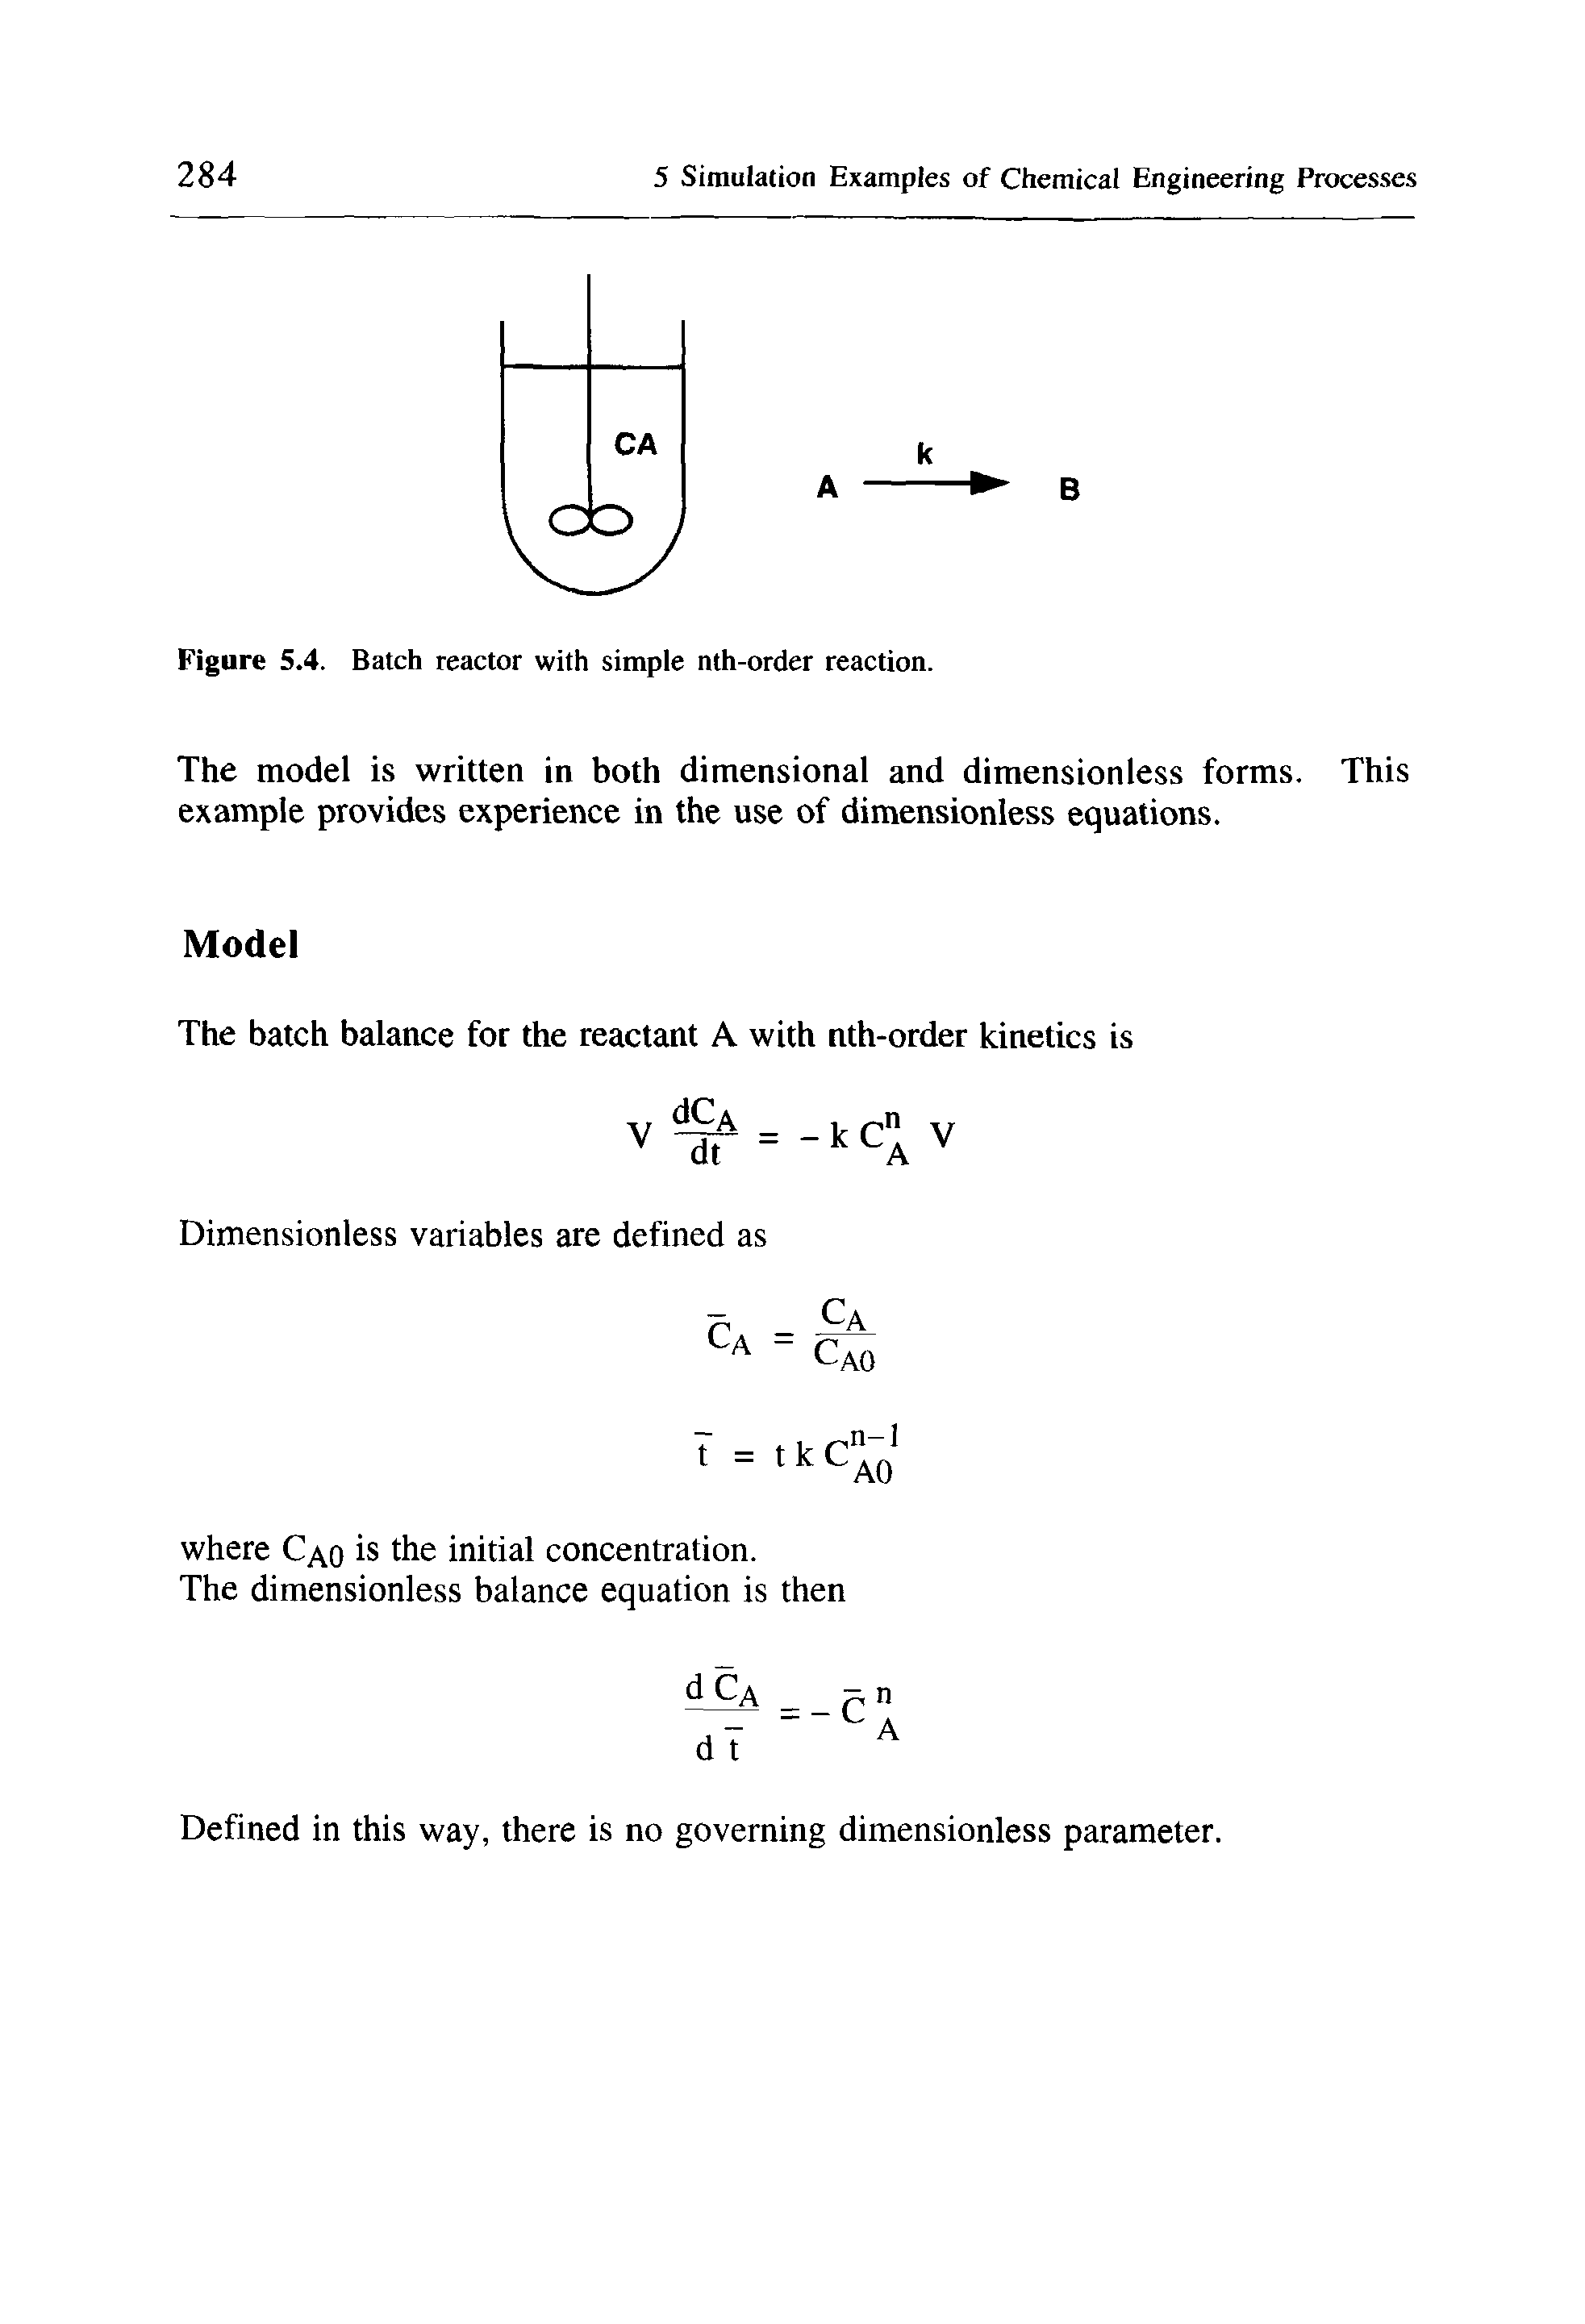 Figure 5.4. Batch reactor with simple nth-order reaction.